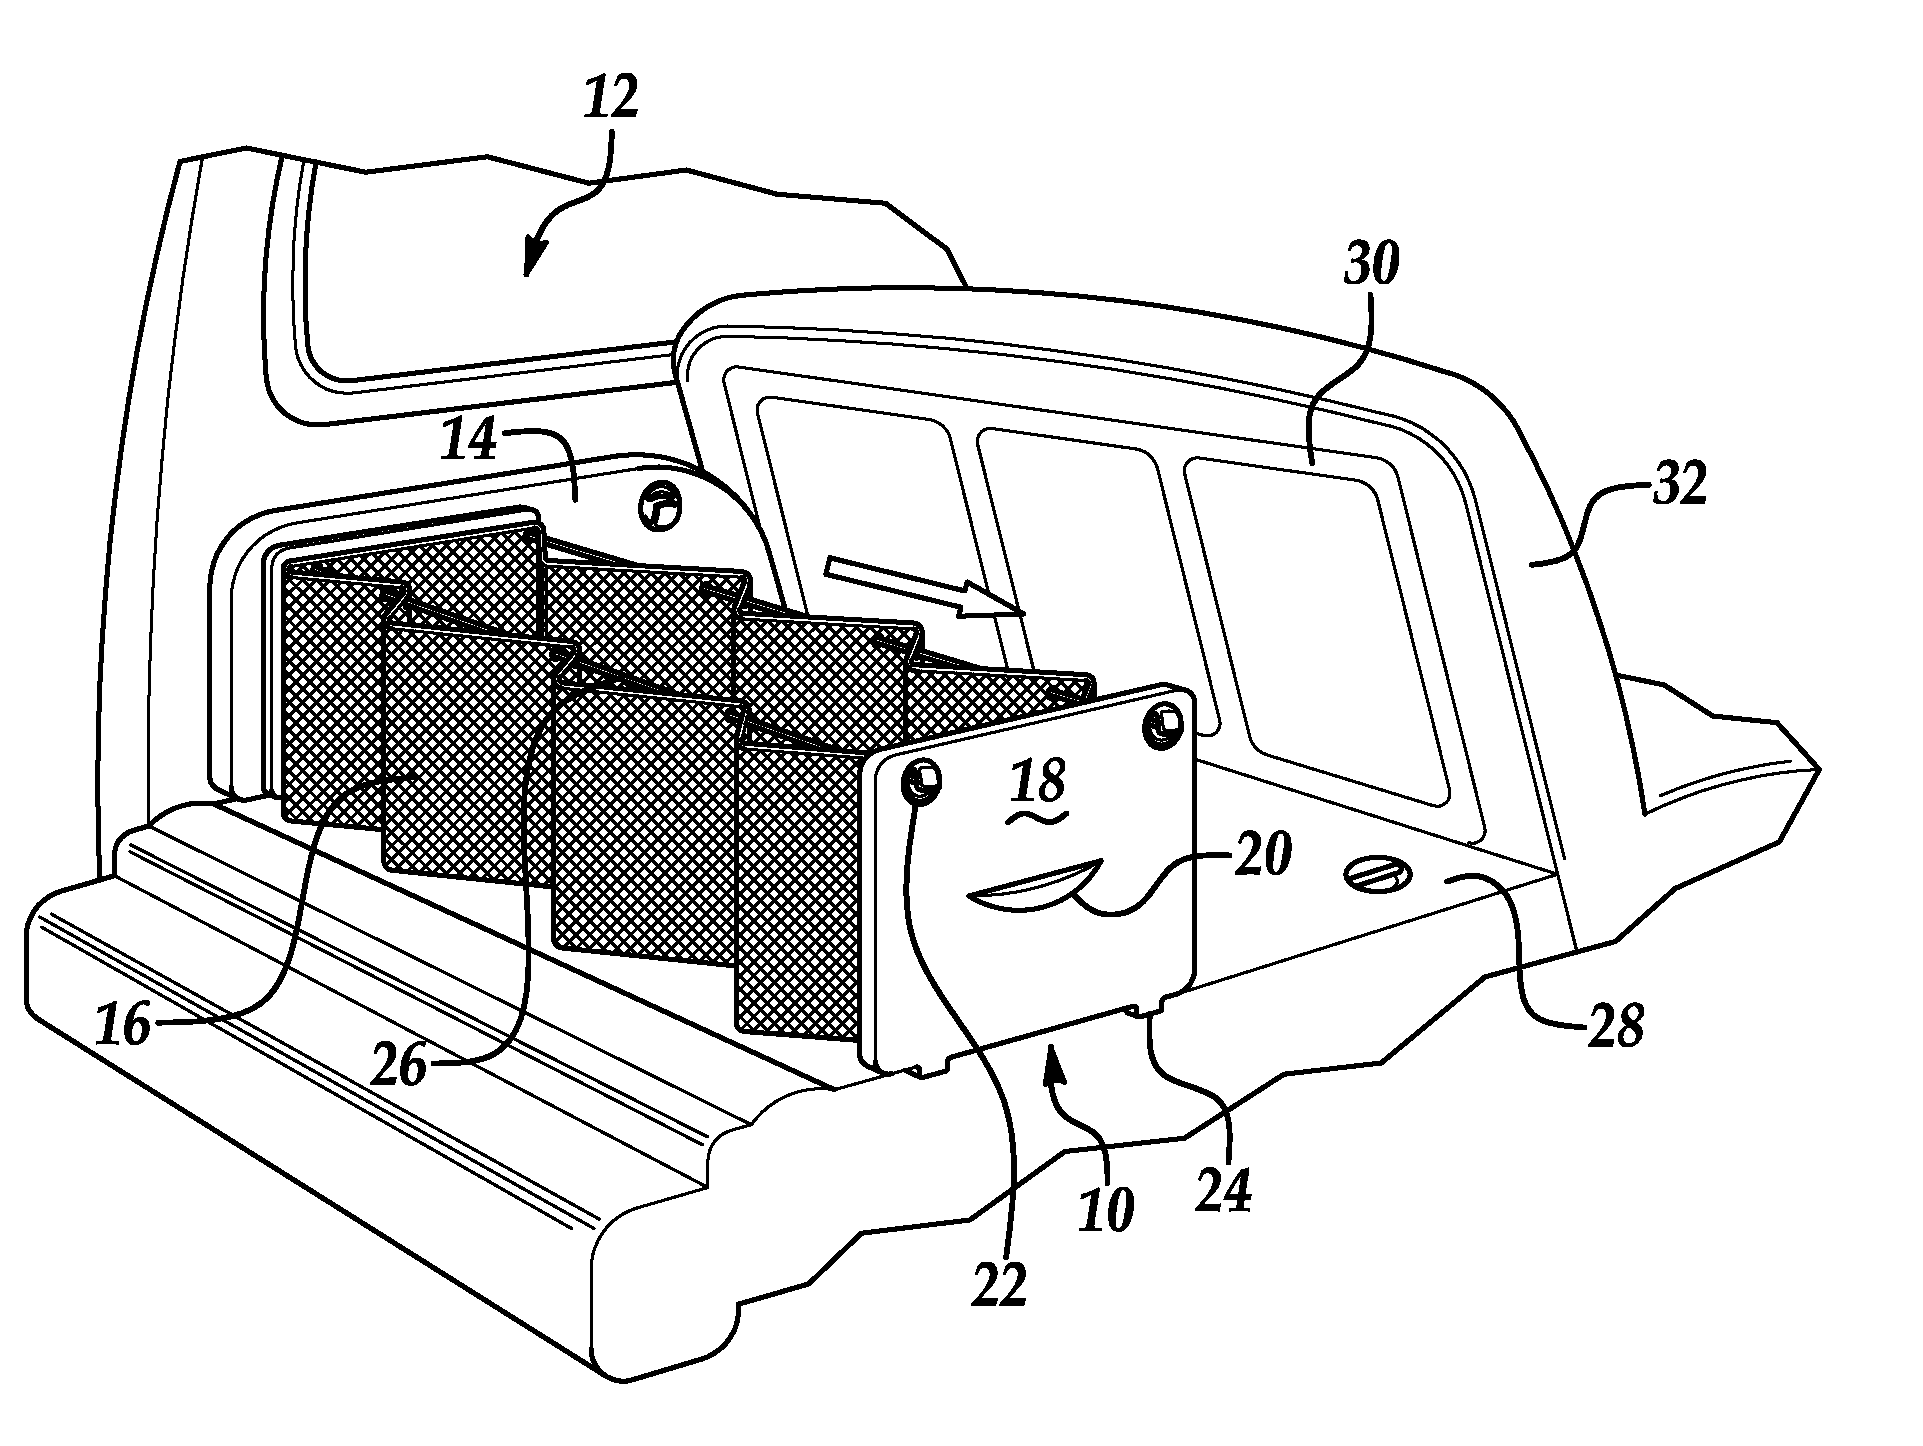 Integrated expandable cargo system for vehicles